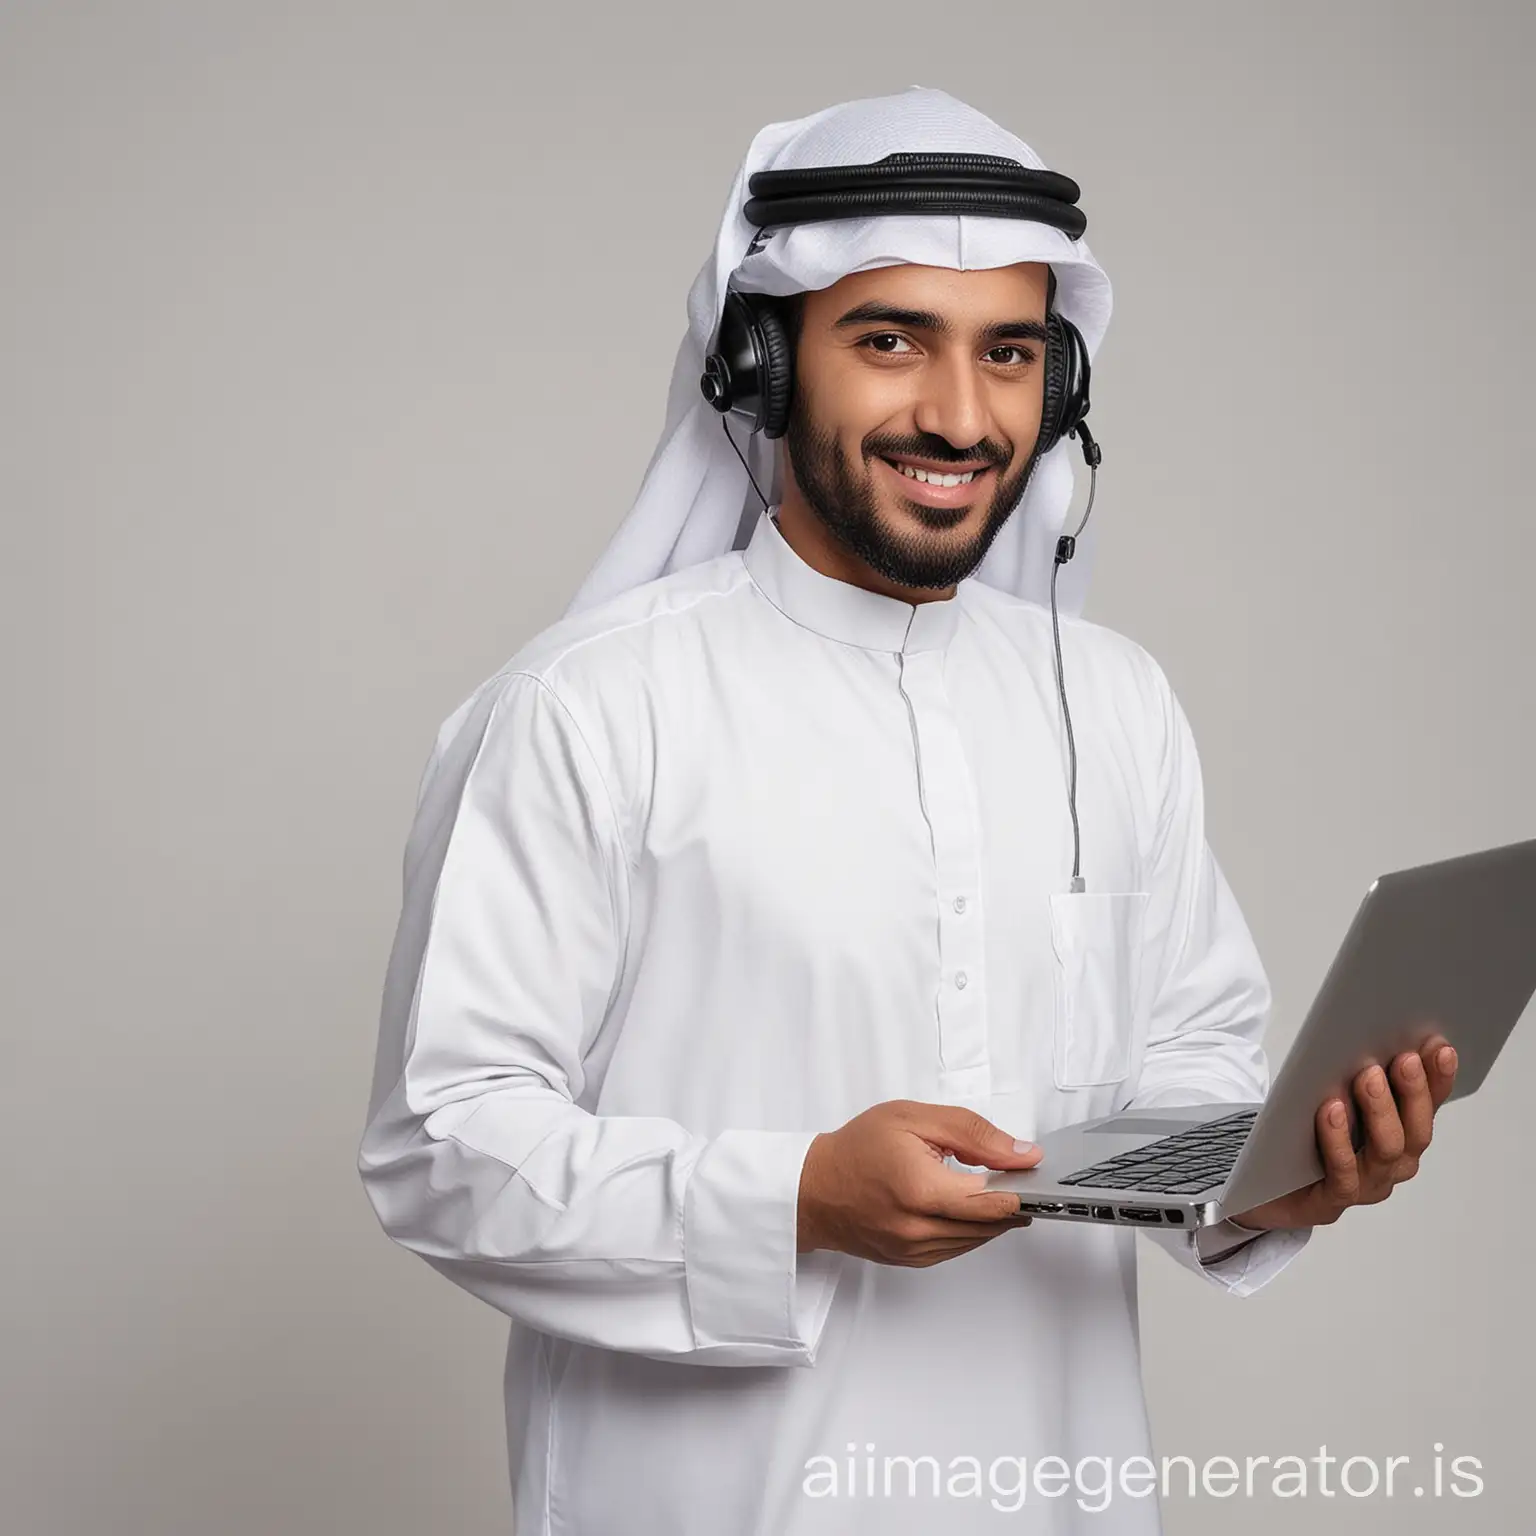 Customer Service kuwaiti man standing infront of white background and smiling while wearing Kuwaiti Oqal and Headset and holding laptop